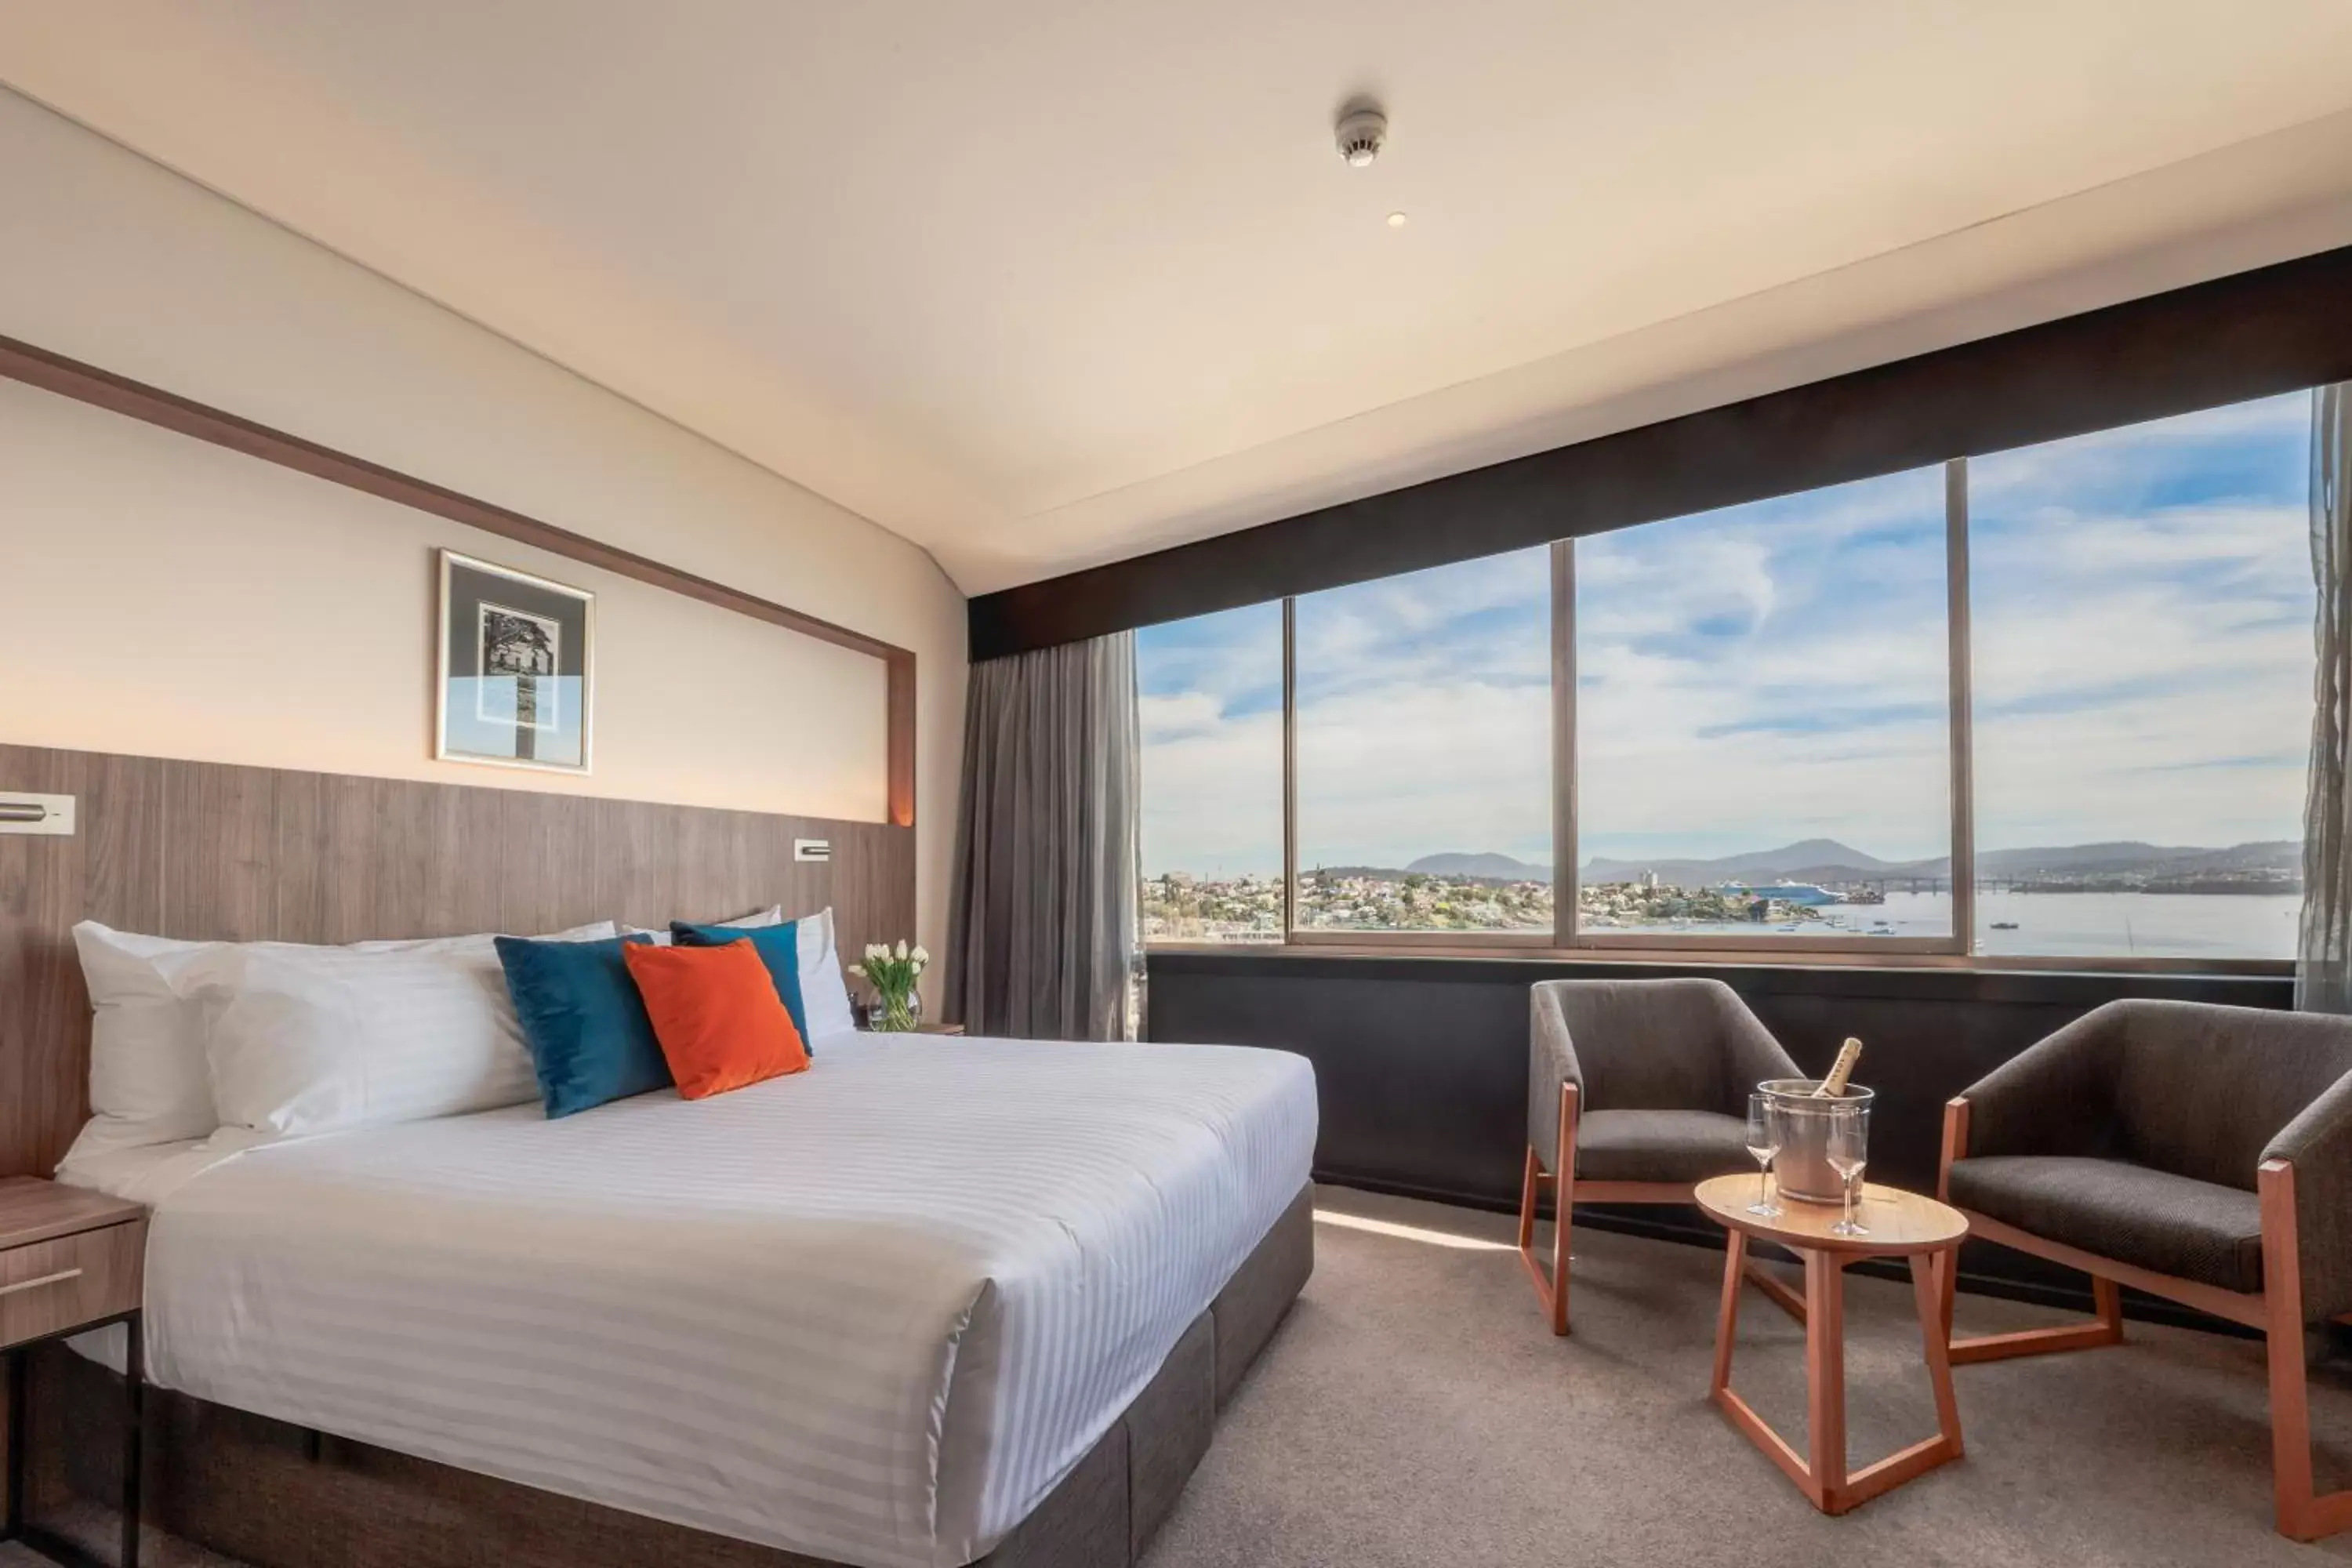 Deluxe King Room with Harbor View in Wrest Point